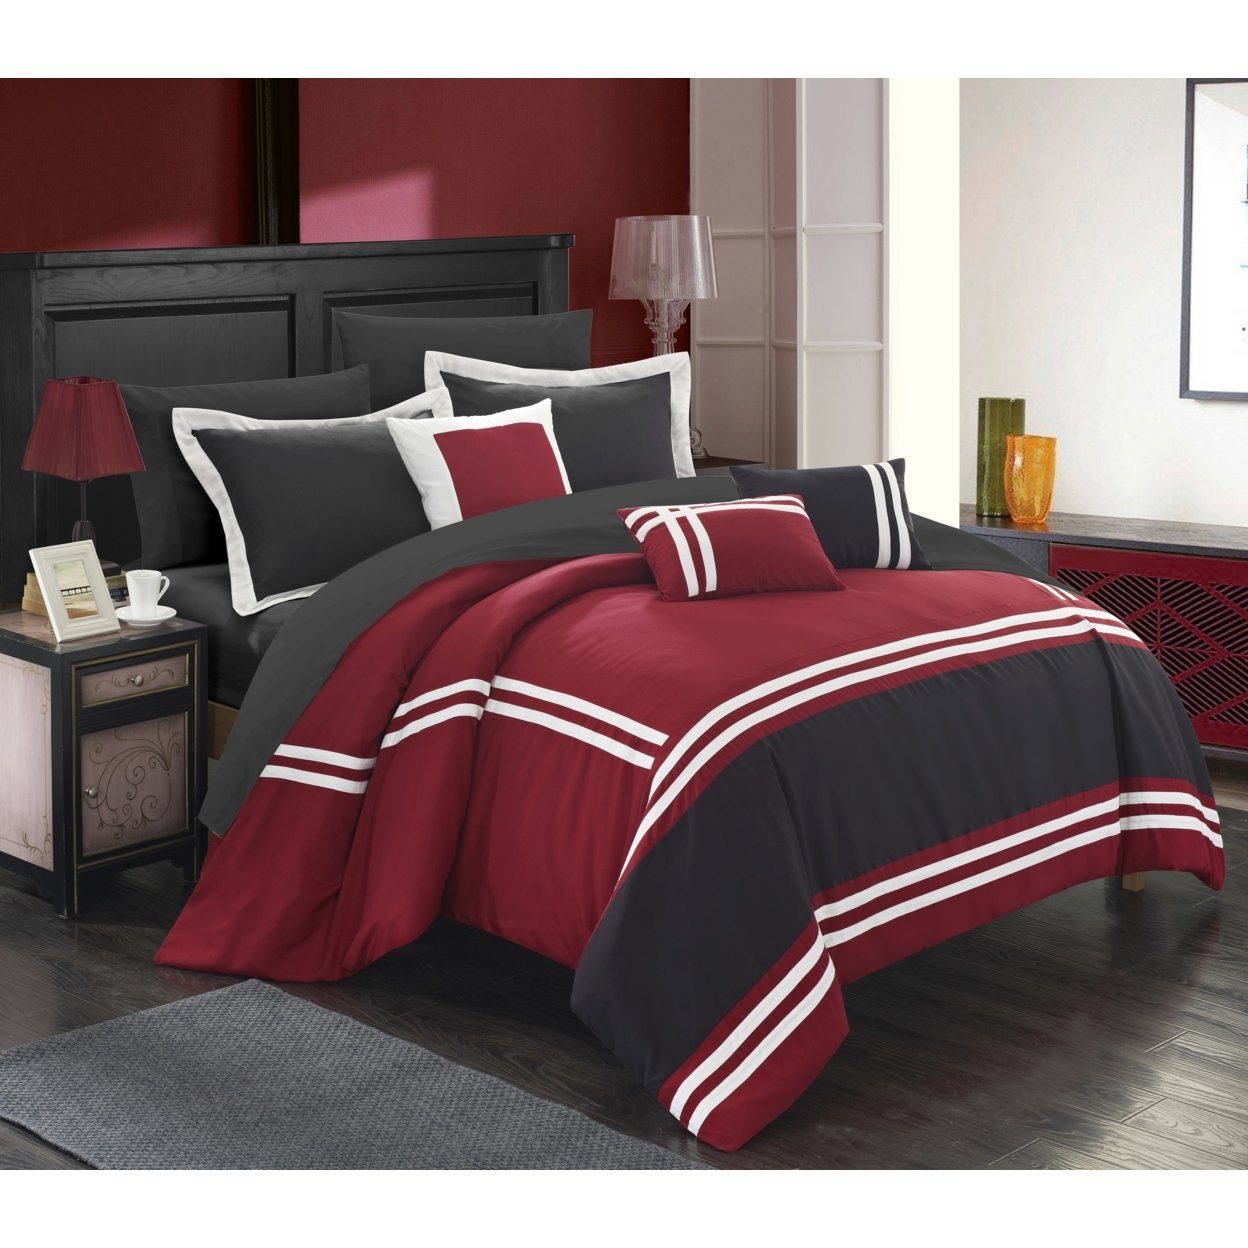 Chic Home 10 Piece Annabel Supersoft Oversized Pieced Color Block Banding Collection Bed In A Bag Comforter Set - Red, King